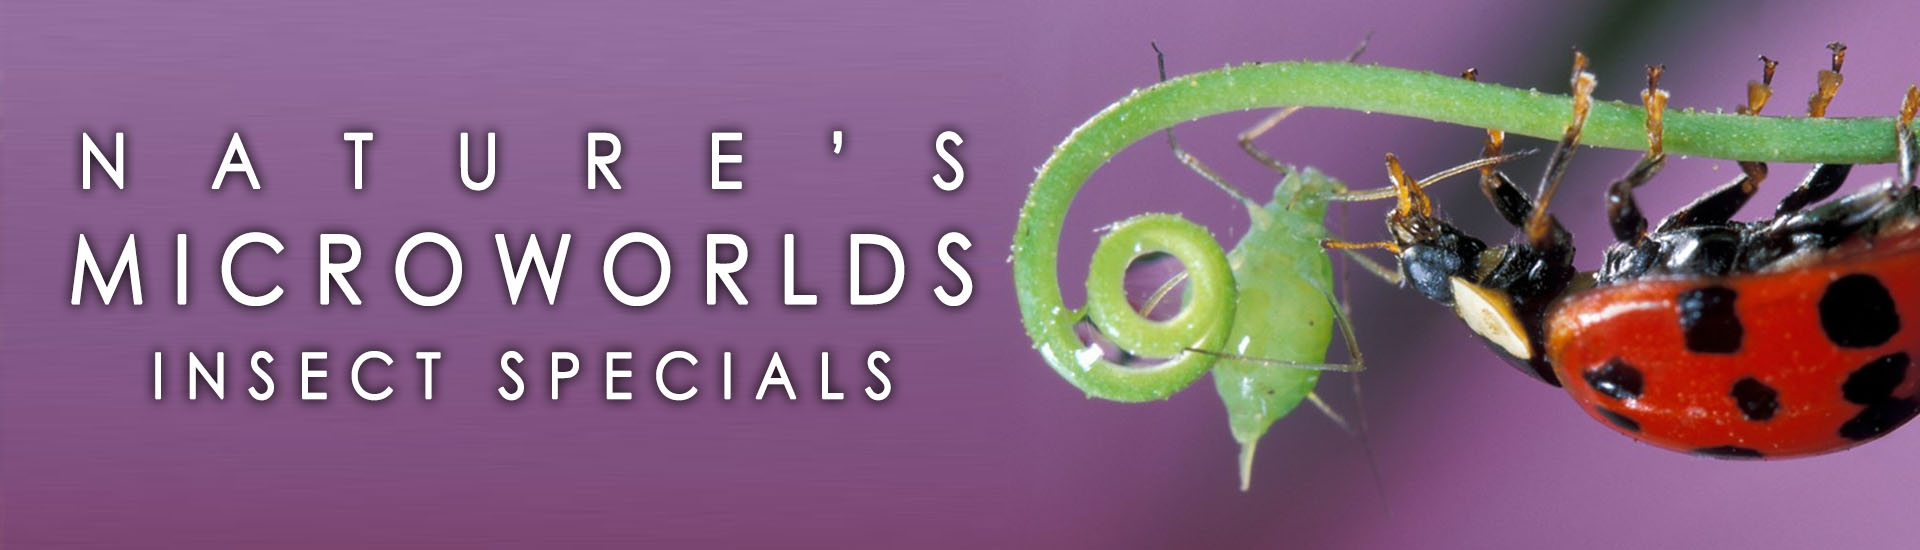 Nature's Microworlds: Insect Specials